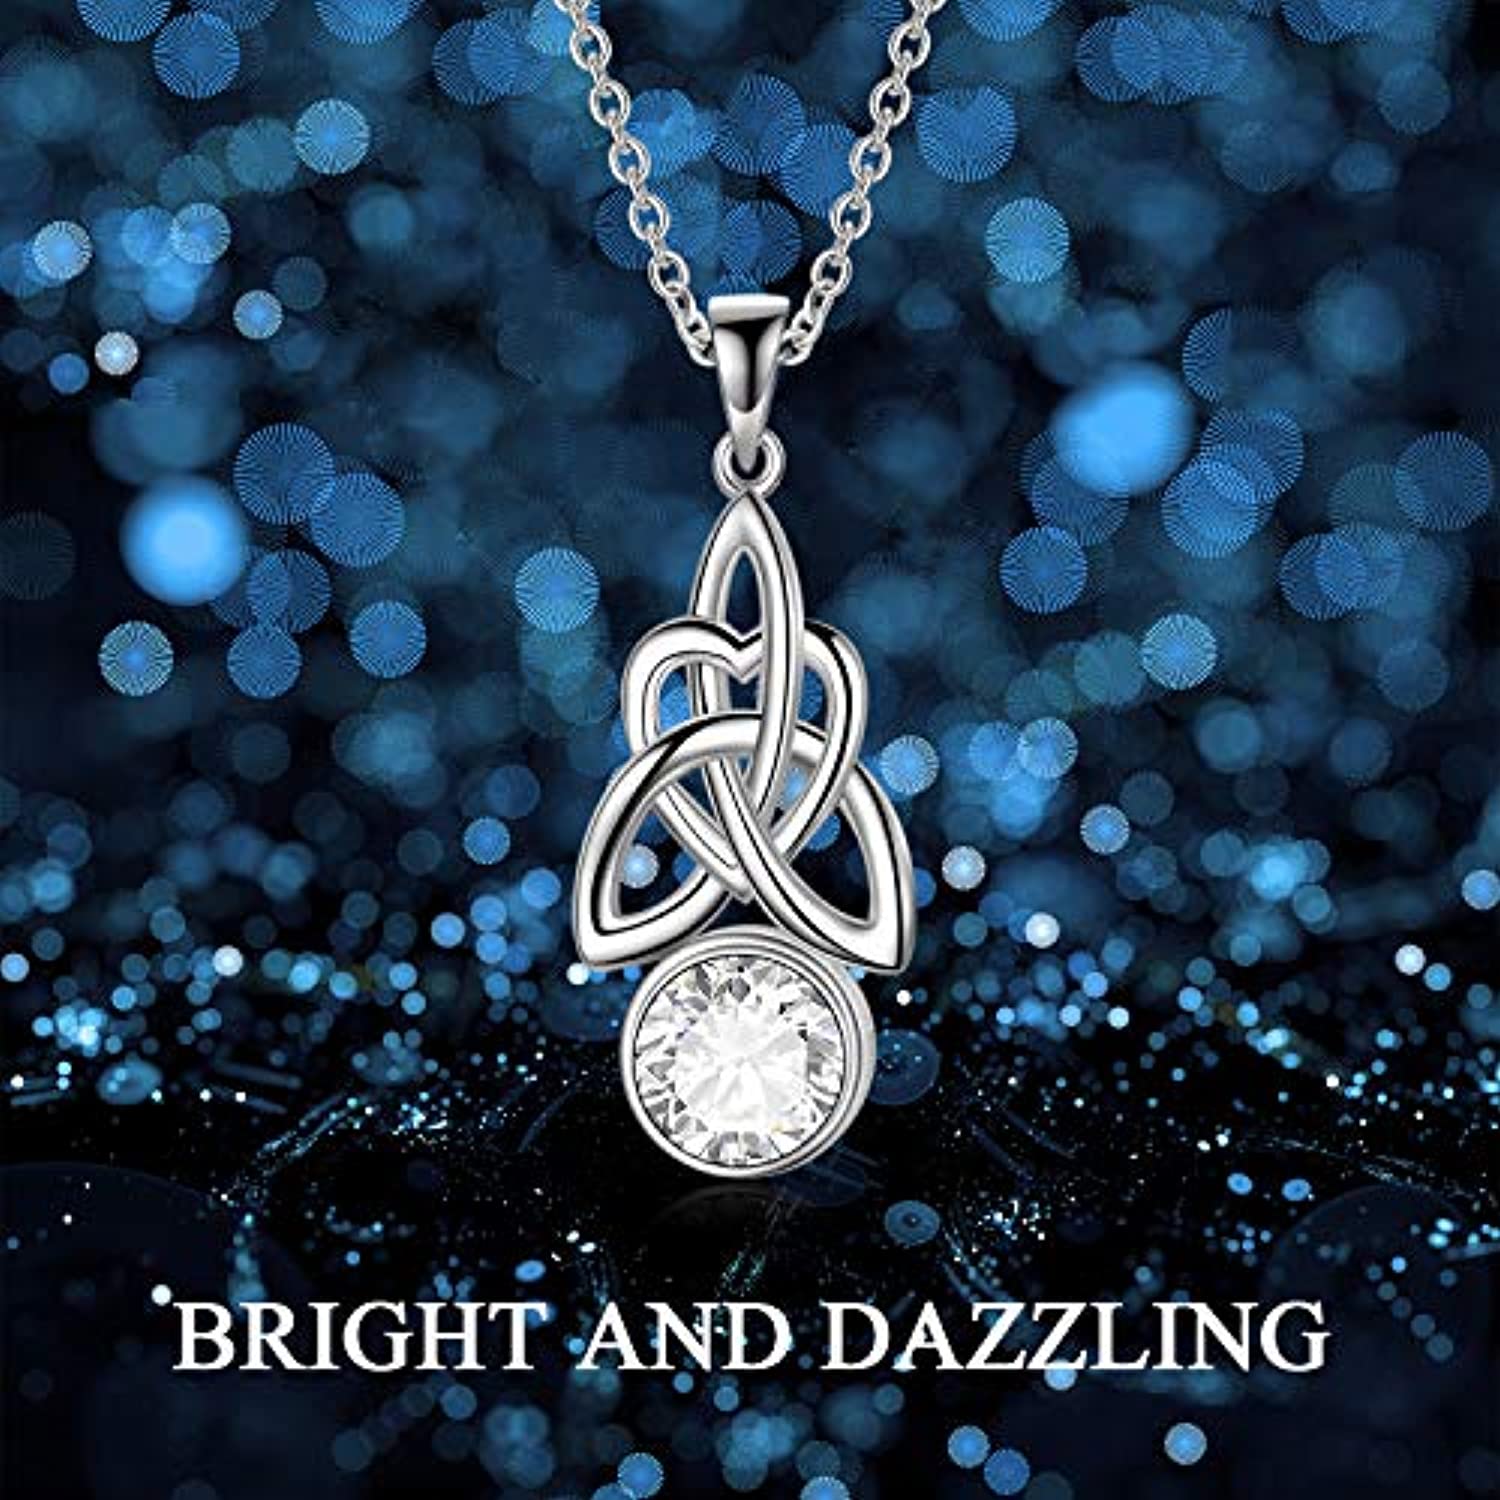 Amazon.com : Heart Knot Silver Necklace Heart Knot Silver Necklace, from  Dad to Daughter, Necklace for Daughter from Dad, Heart Pendant for Daughter  : Sports & Outdoors